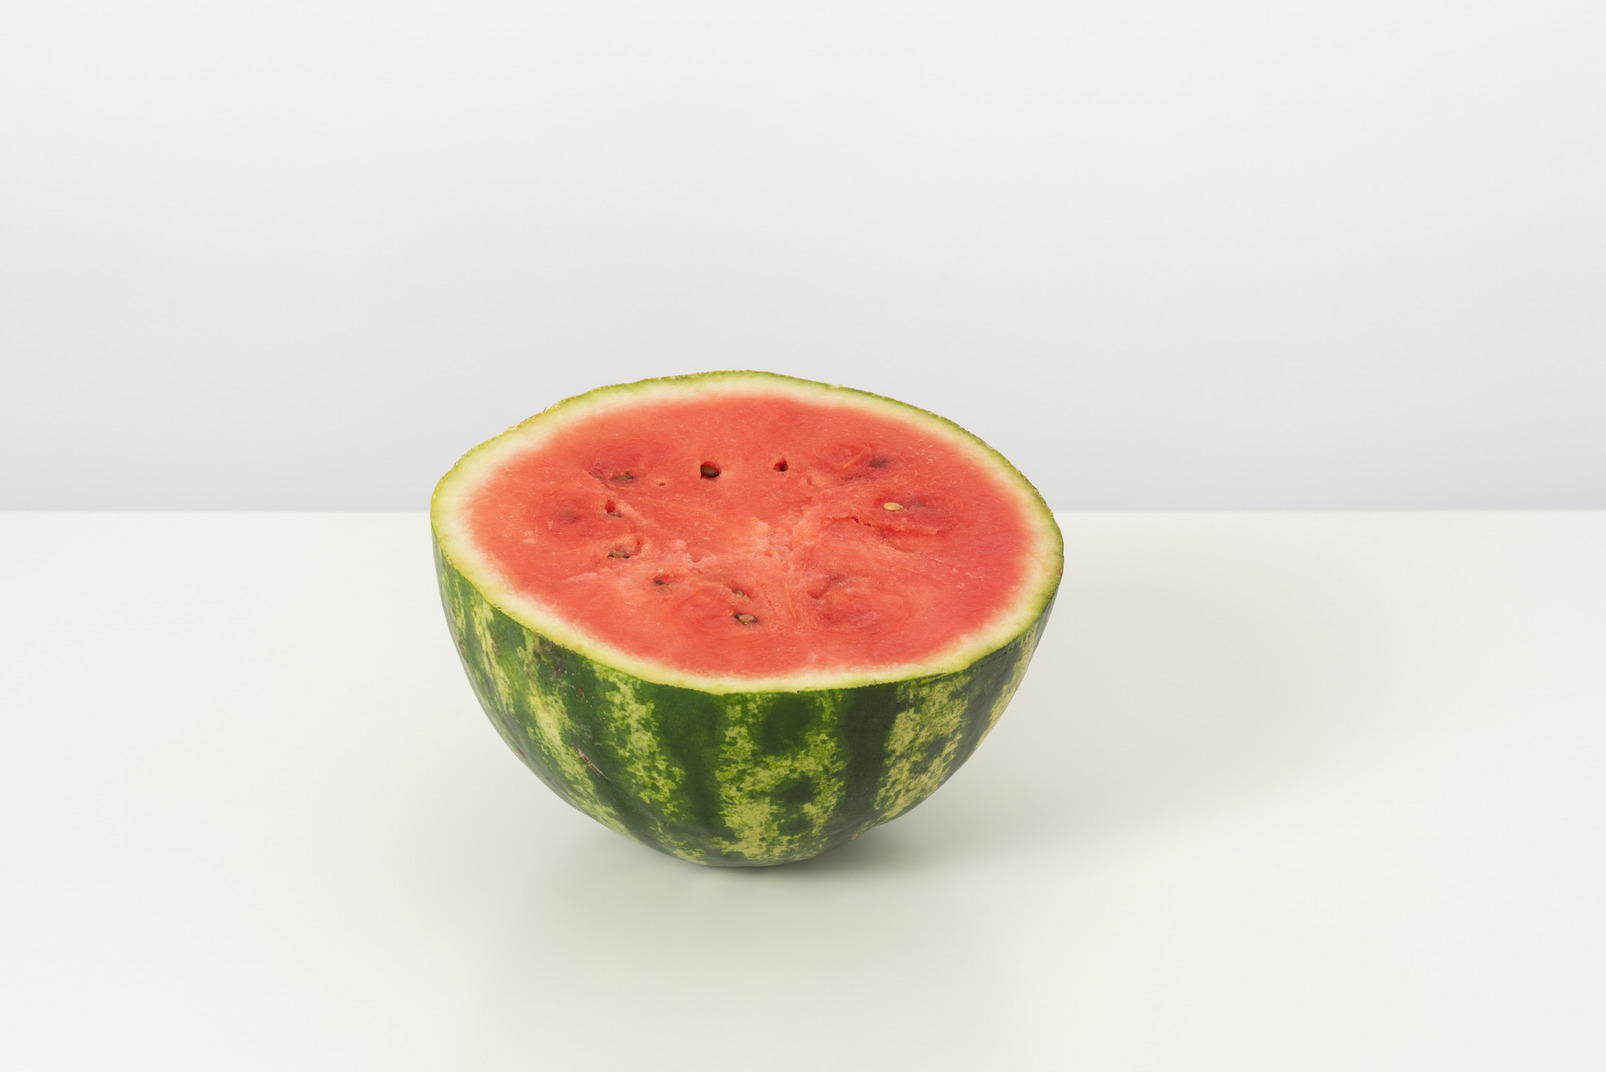 A half of a sweet ripe watermelon, lying isolated against a white background, looking nice and yummy